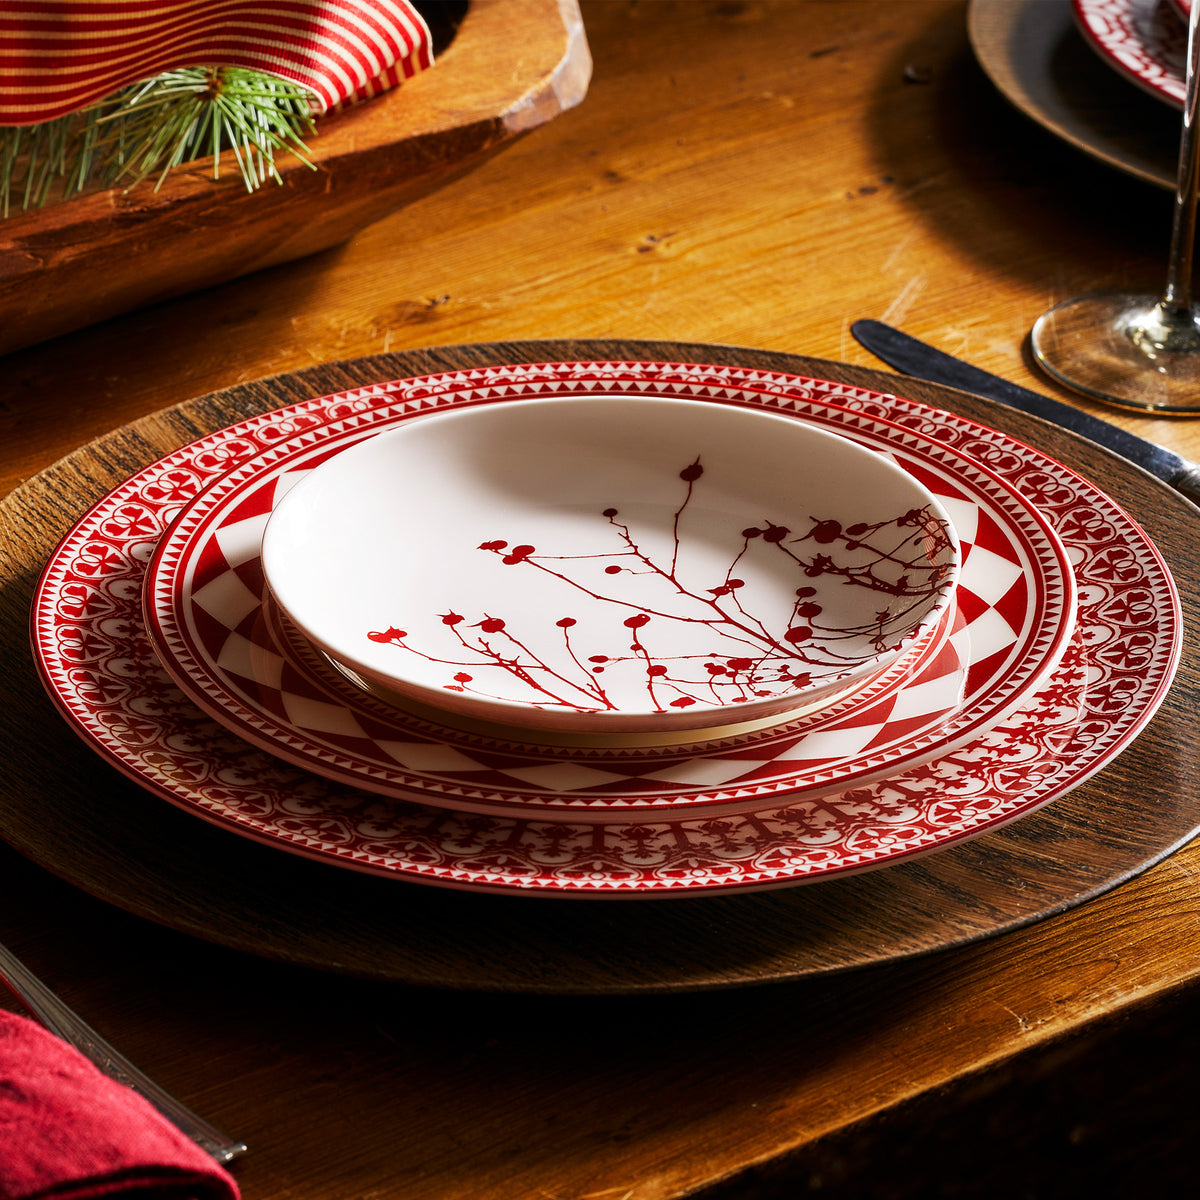 A festive red and white place setting featuring Casablanca dinner, Fez Salad and Winterberries Canapé from Caskata.